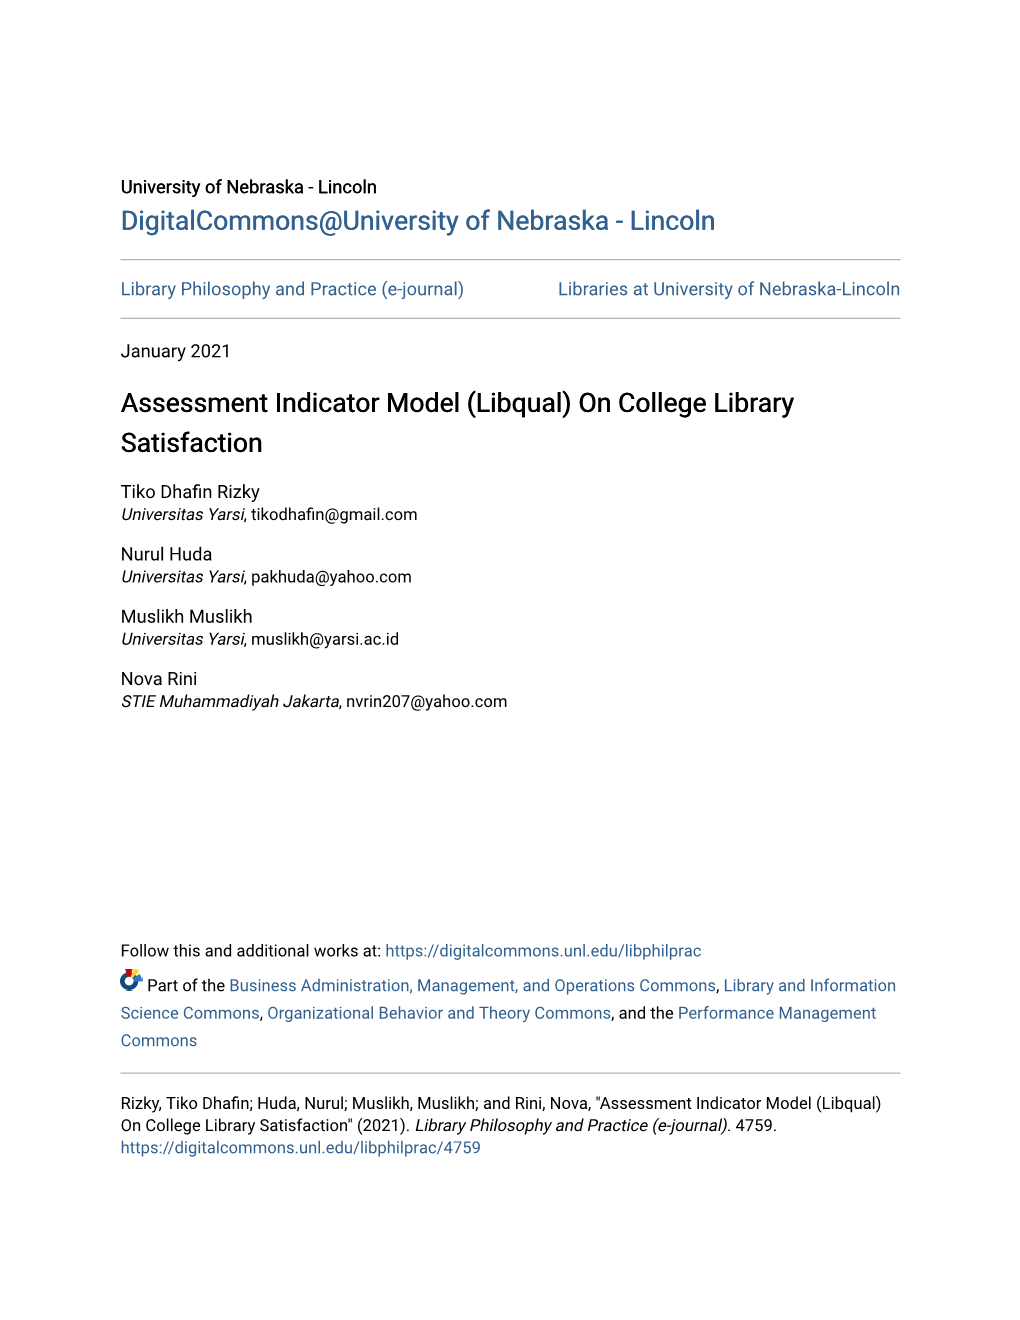 Libqual) on College Library Satisfaction